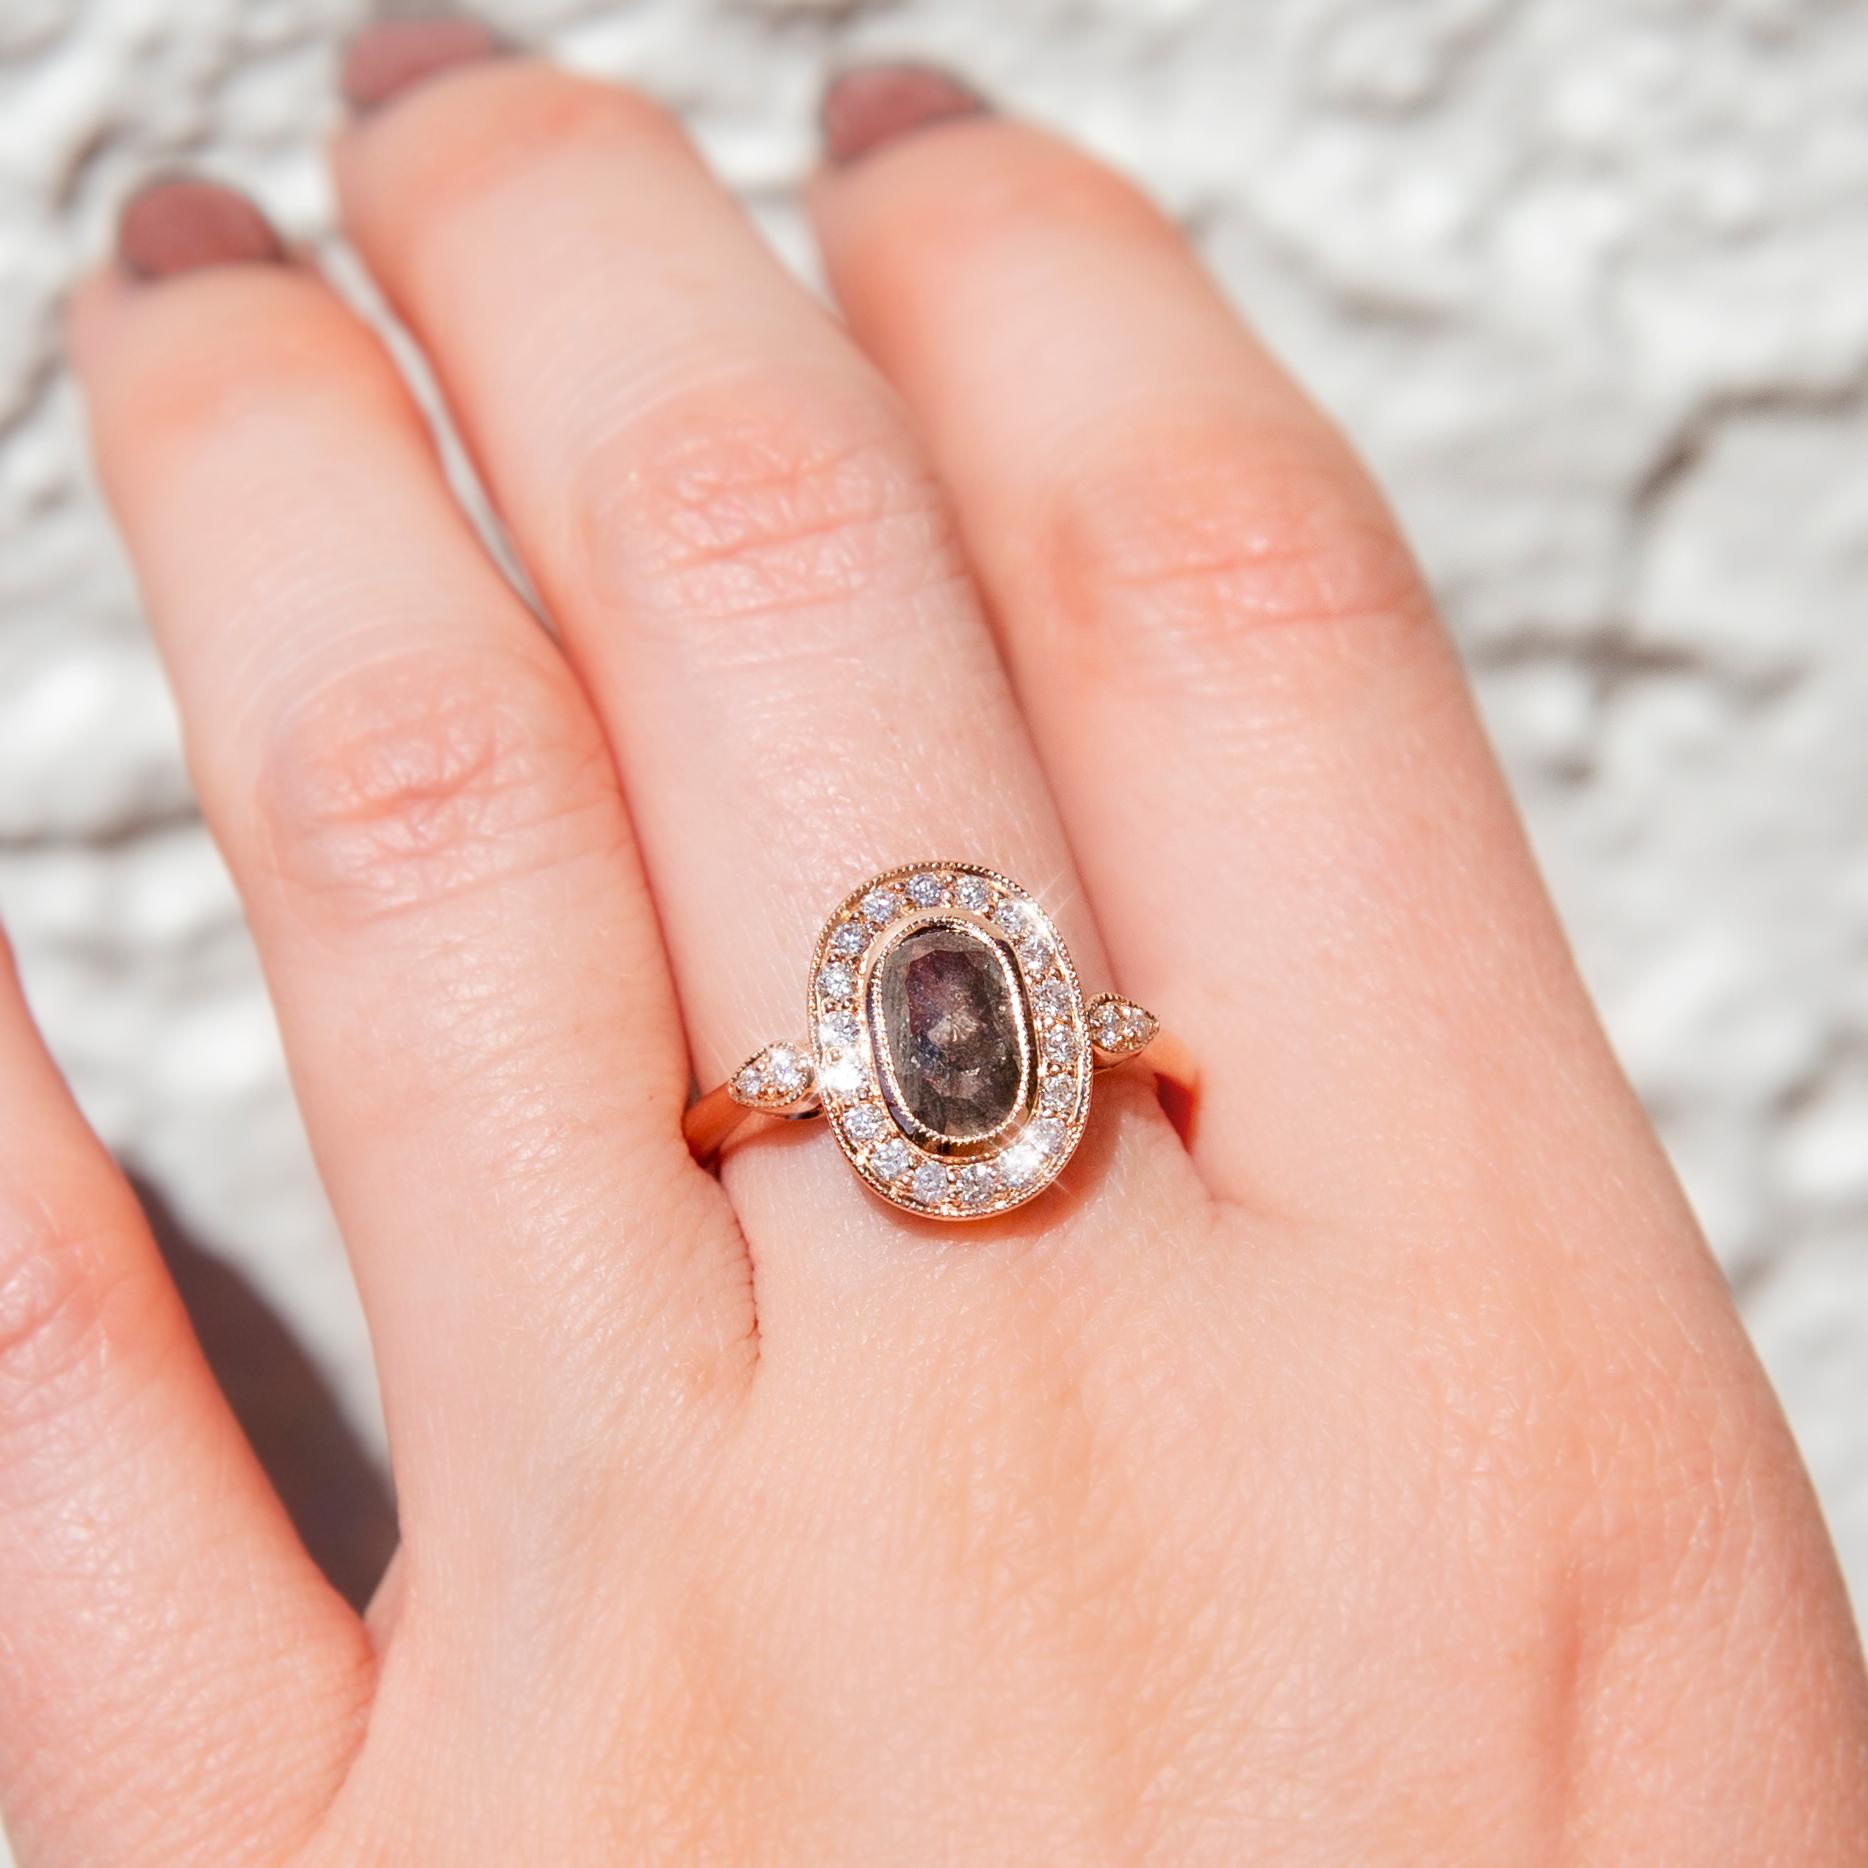 Lovingly crafted in 18 carat rose gold, this stunning contemporary ring features a gorgeous oval rose cut 1.13 carat 'salt and pepper' diamond in an elegant millegrain setting with a halo of bead set round brilliant diamonds shimmering in unity. We